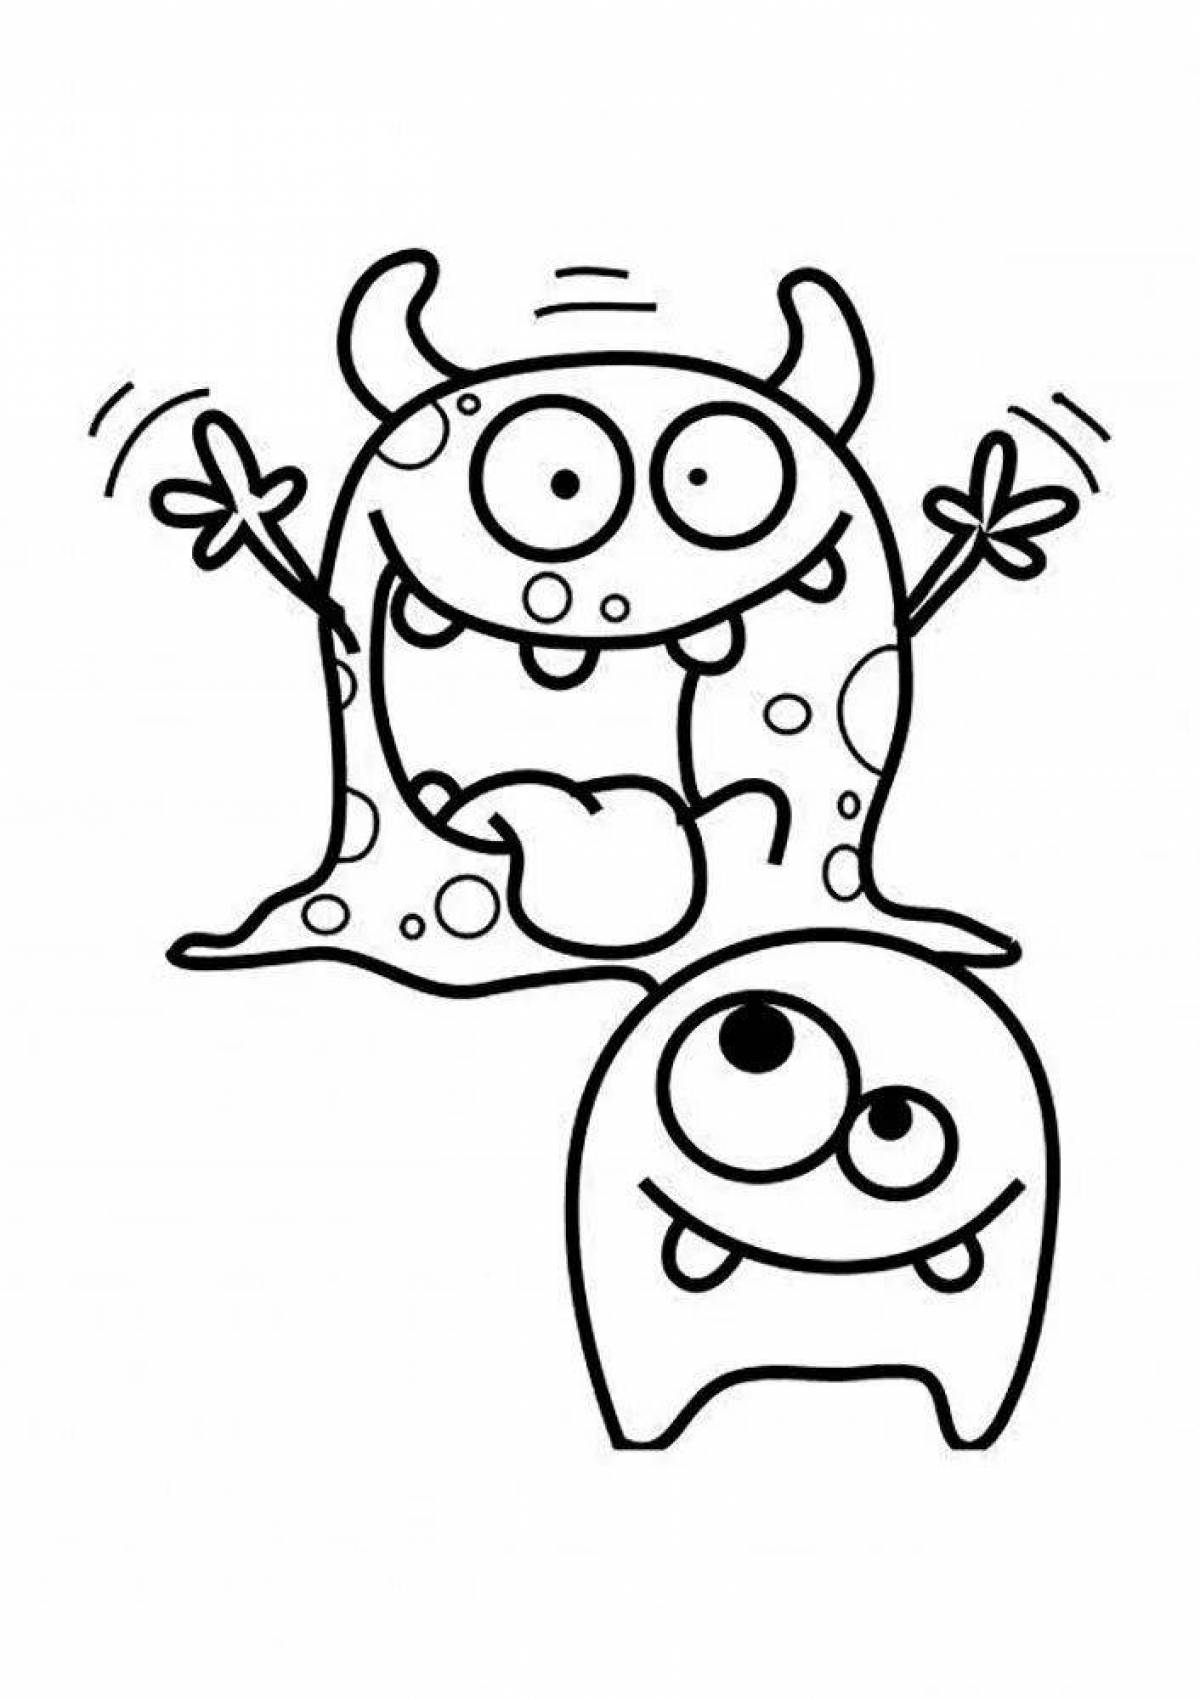 Creative coloring pages monsters for kids